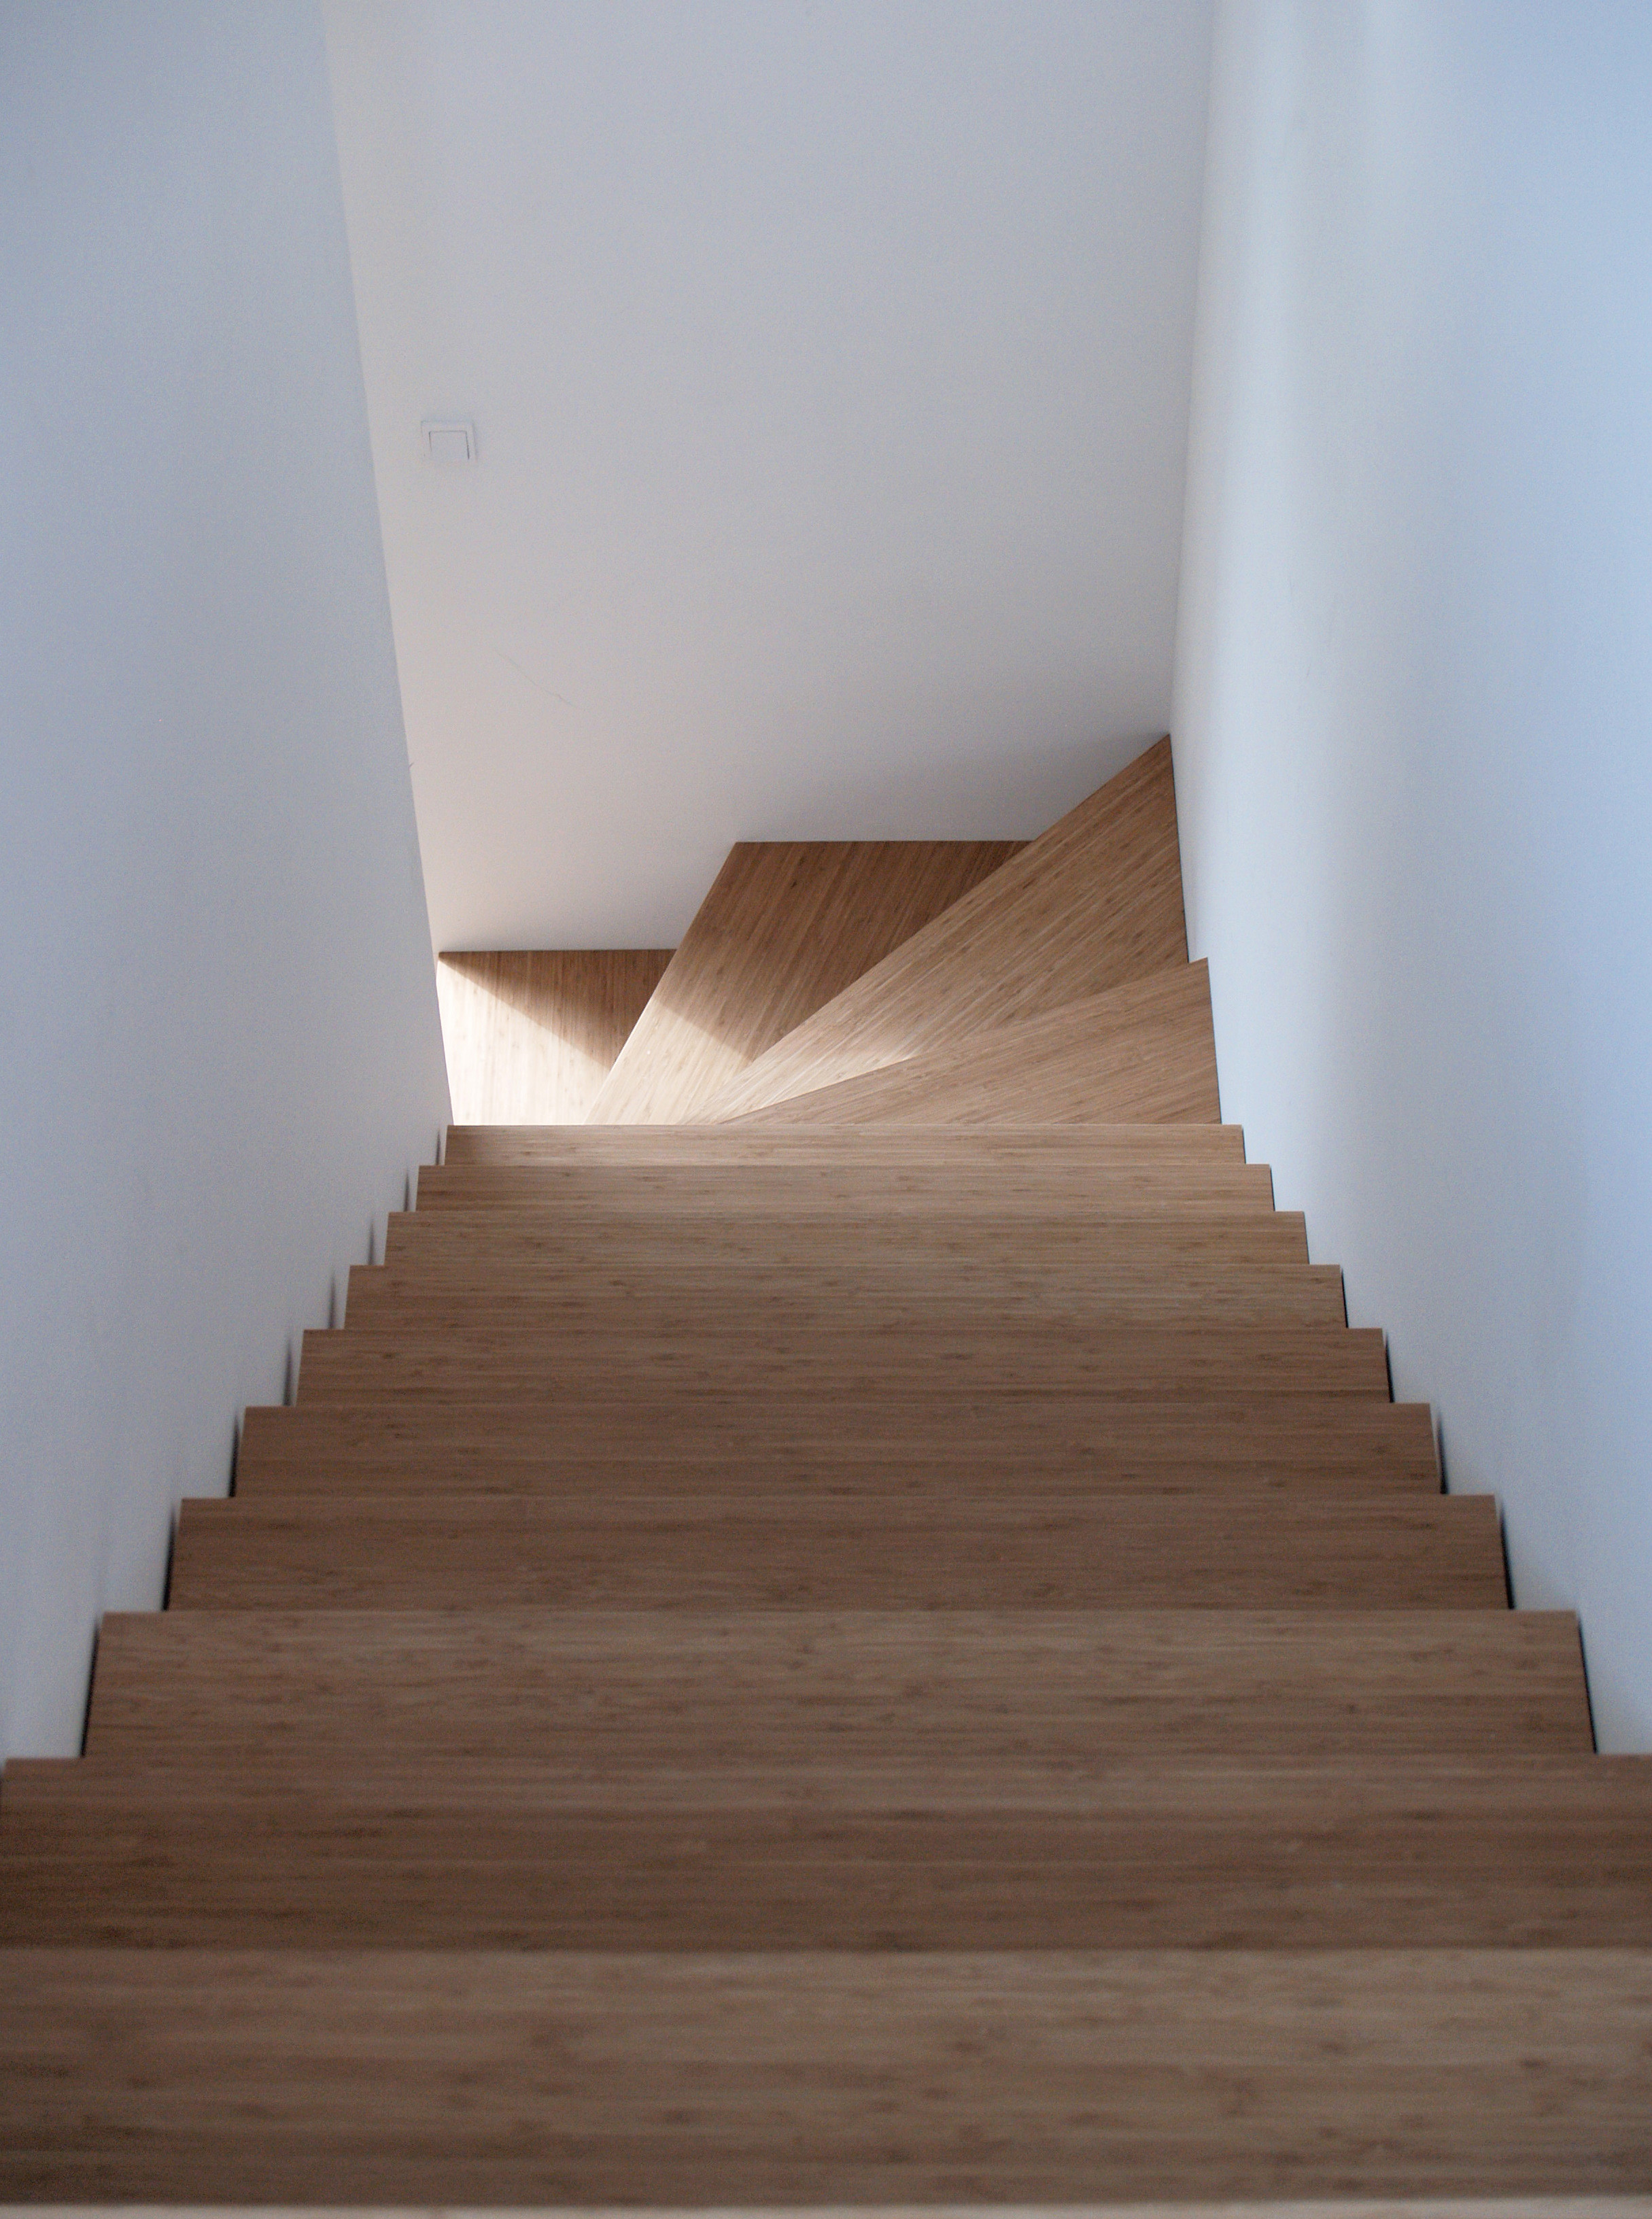 15 Popular How to Hardwood Floor Stairs 2024 free download how to hardwood floor stairs of filebbb low cost housing bamboo stairs tegnestuen vandkunsten within filebbb low cost housing bamboo stairs tegnestuen vandkunsten 2004 2008